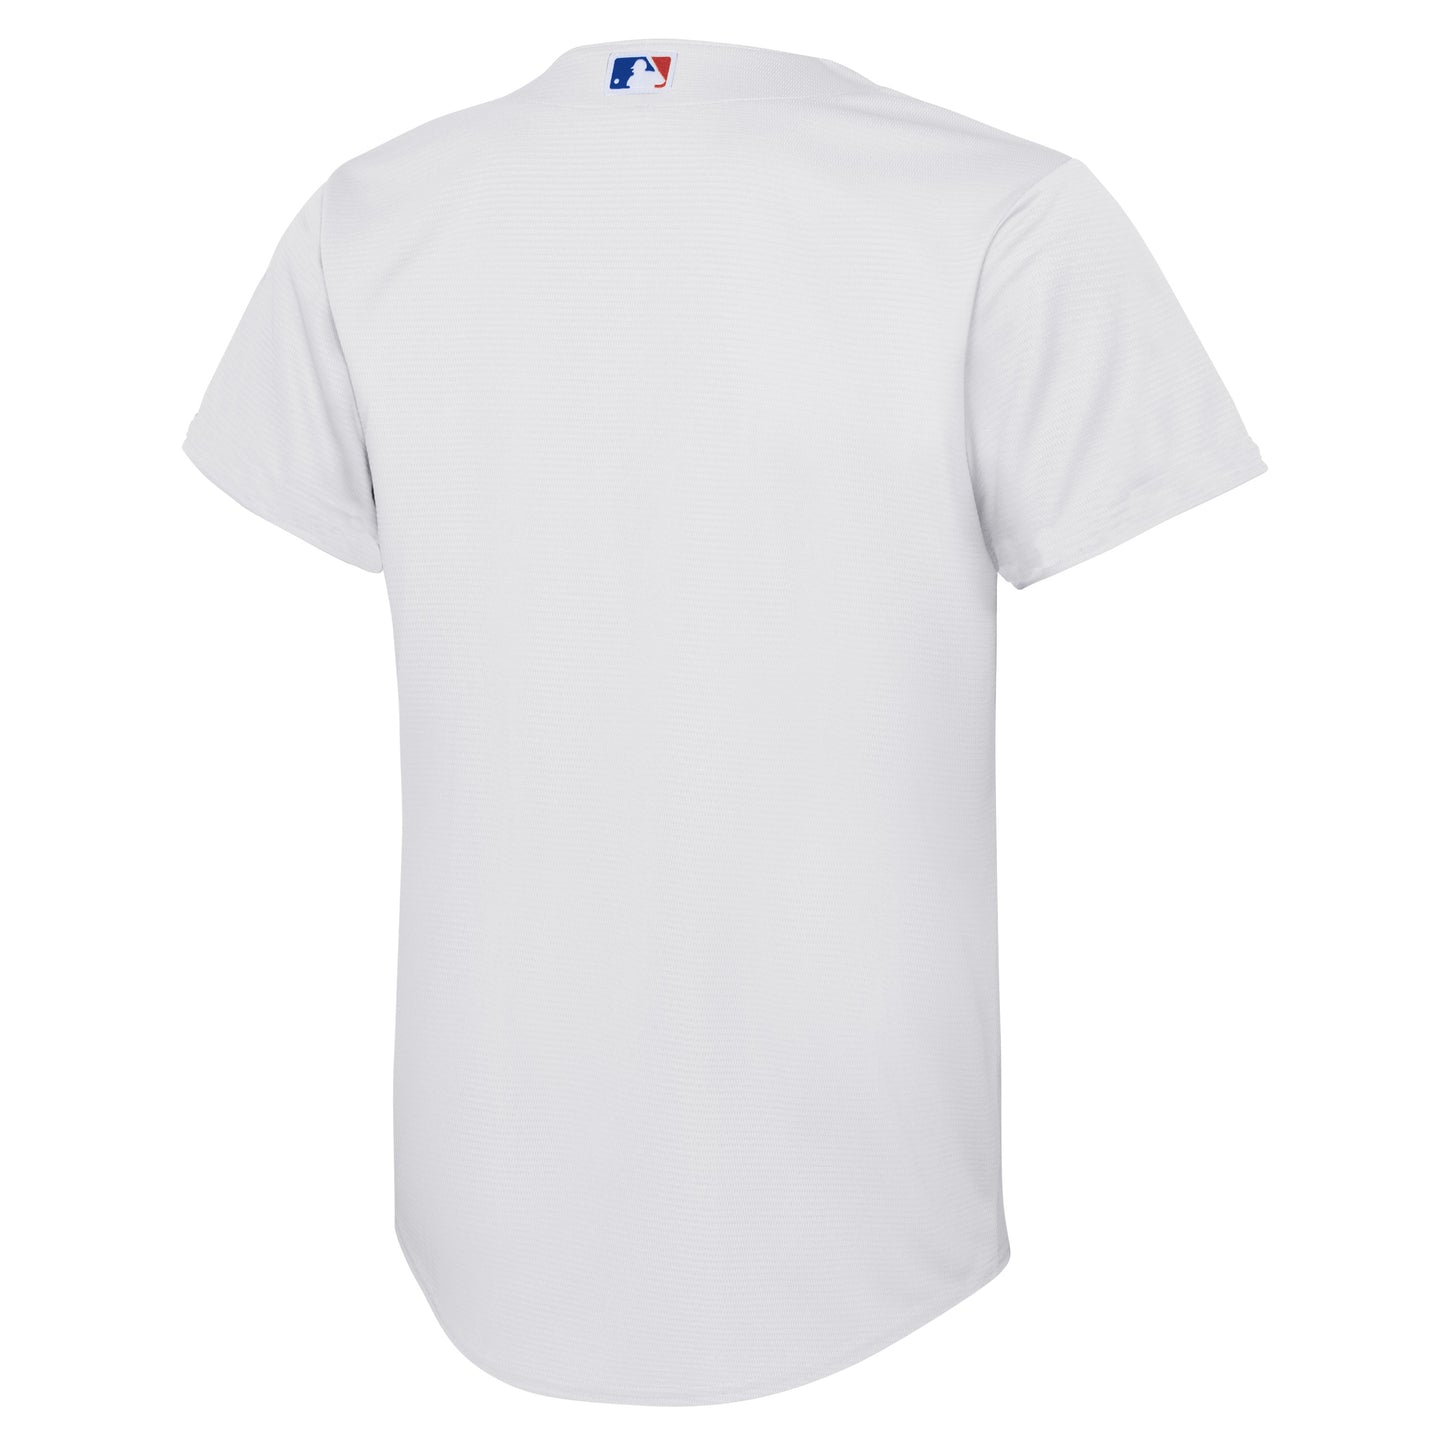 NIKE Youth Los Angeles Dodgers Home White Replica Jersey